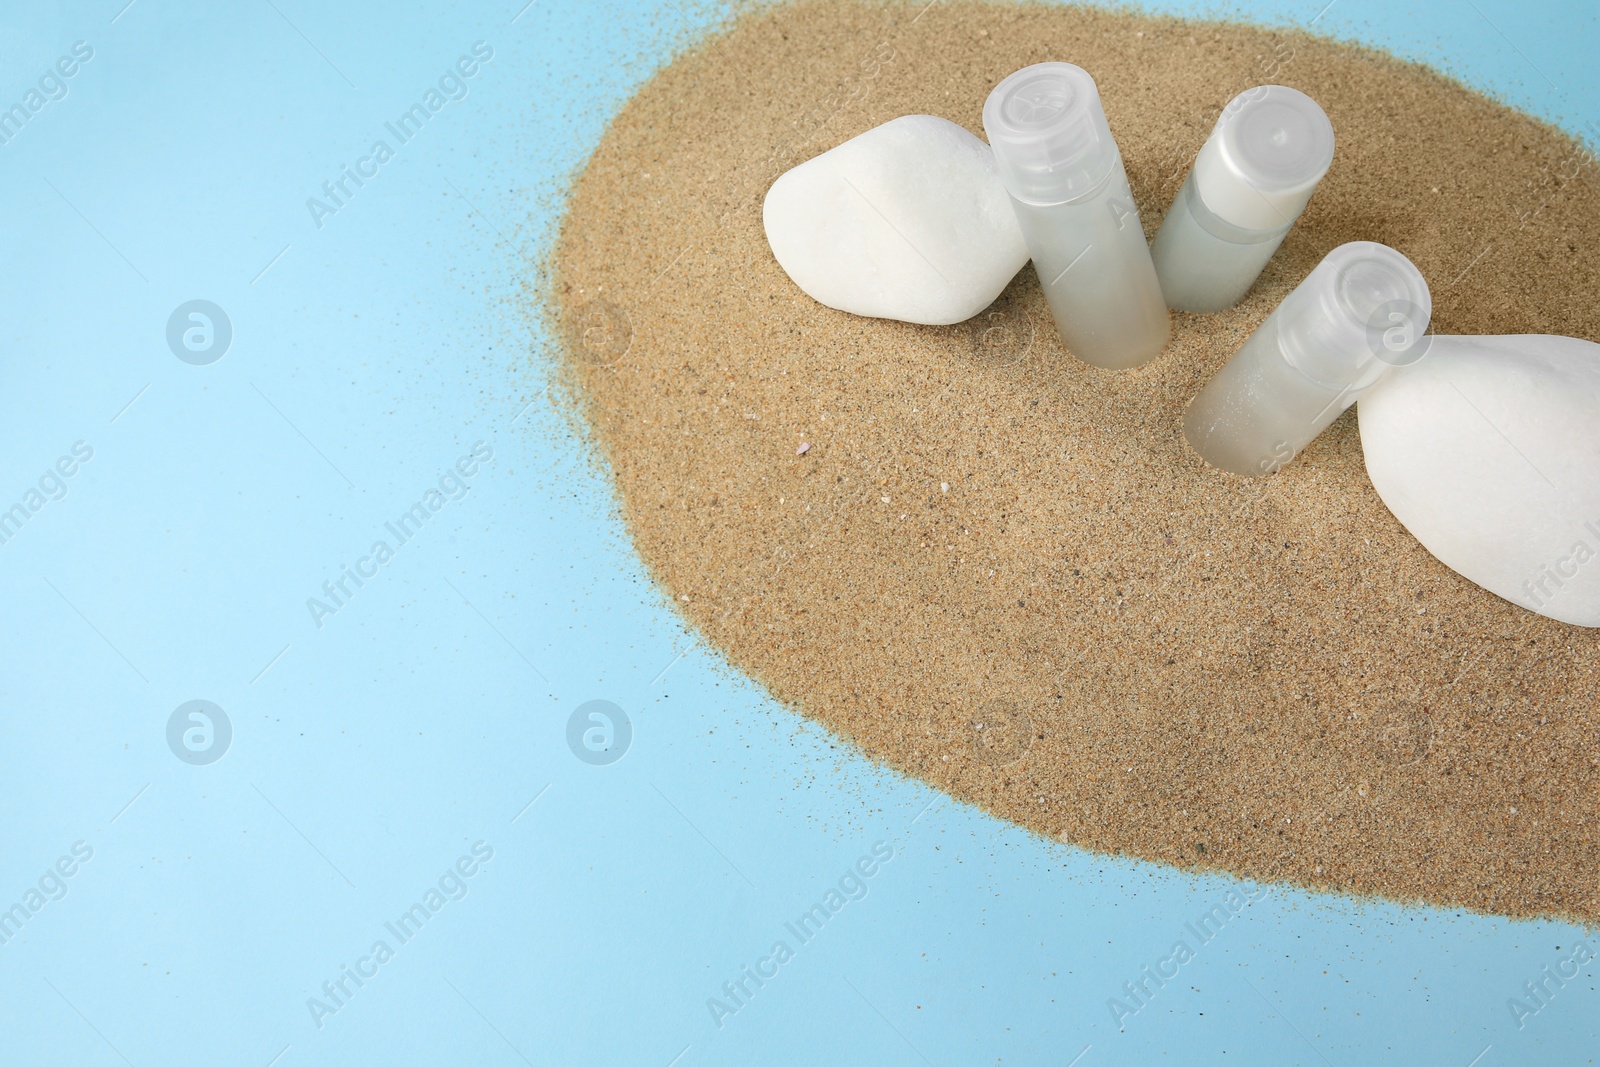 Photo of Bottles of serum and stones on sand against light blue background, above view with space for text. Cosmetic product